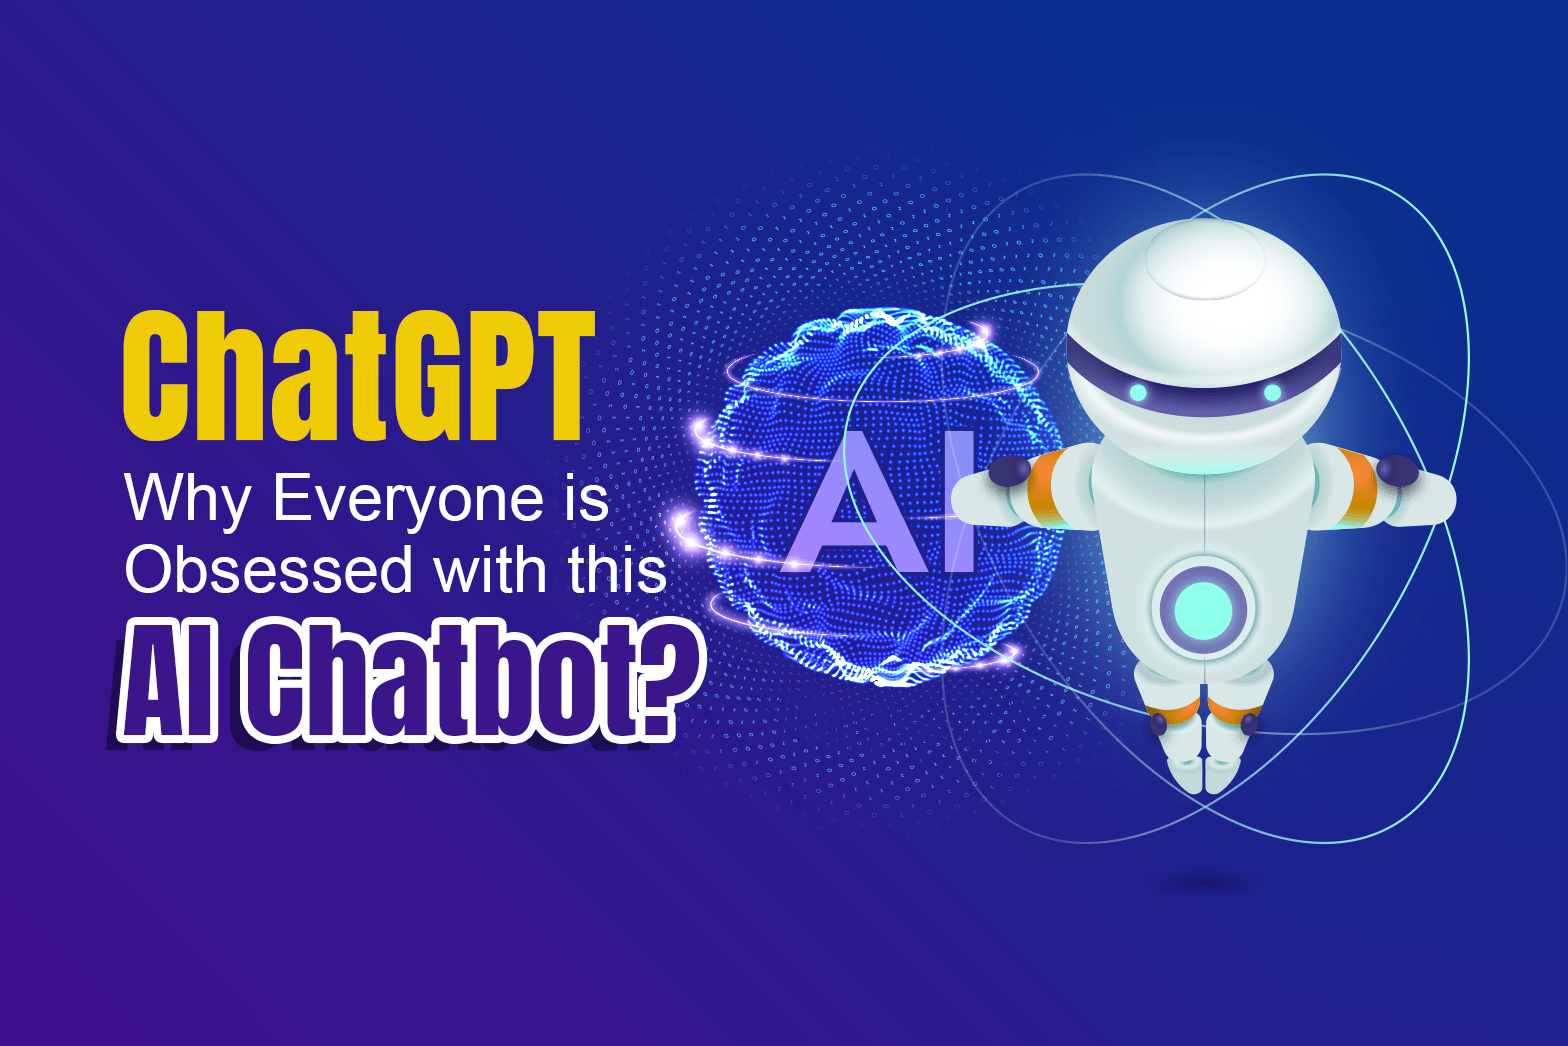 ChatGPT: Why Everyone is Obsessed with this AI Chatbot?